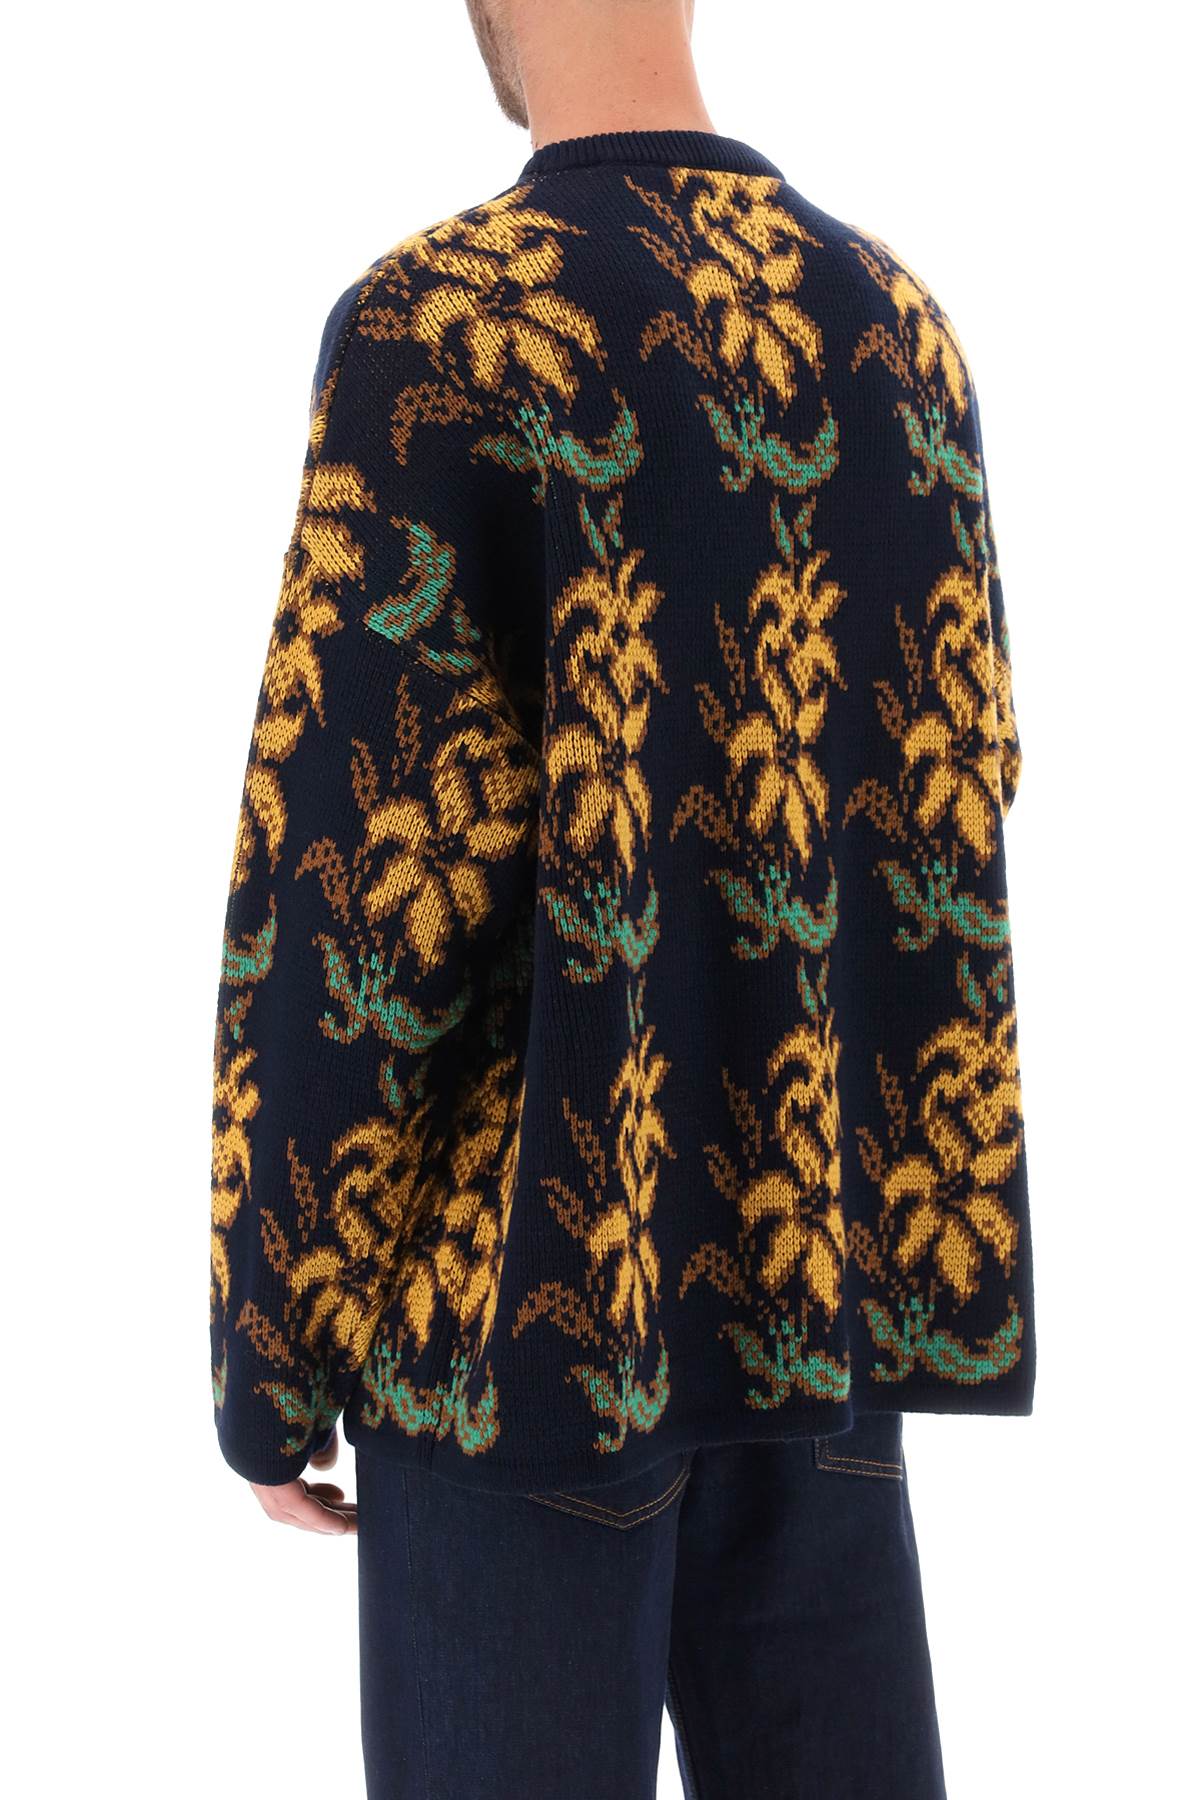 Etro sweater with floral pattern-2